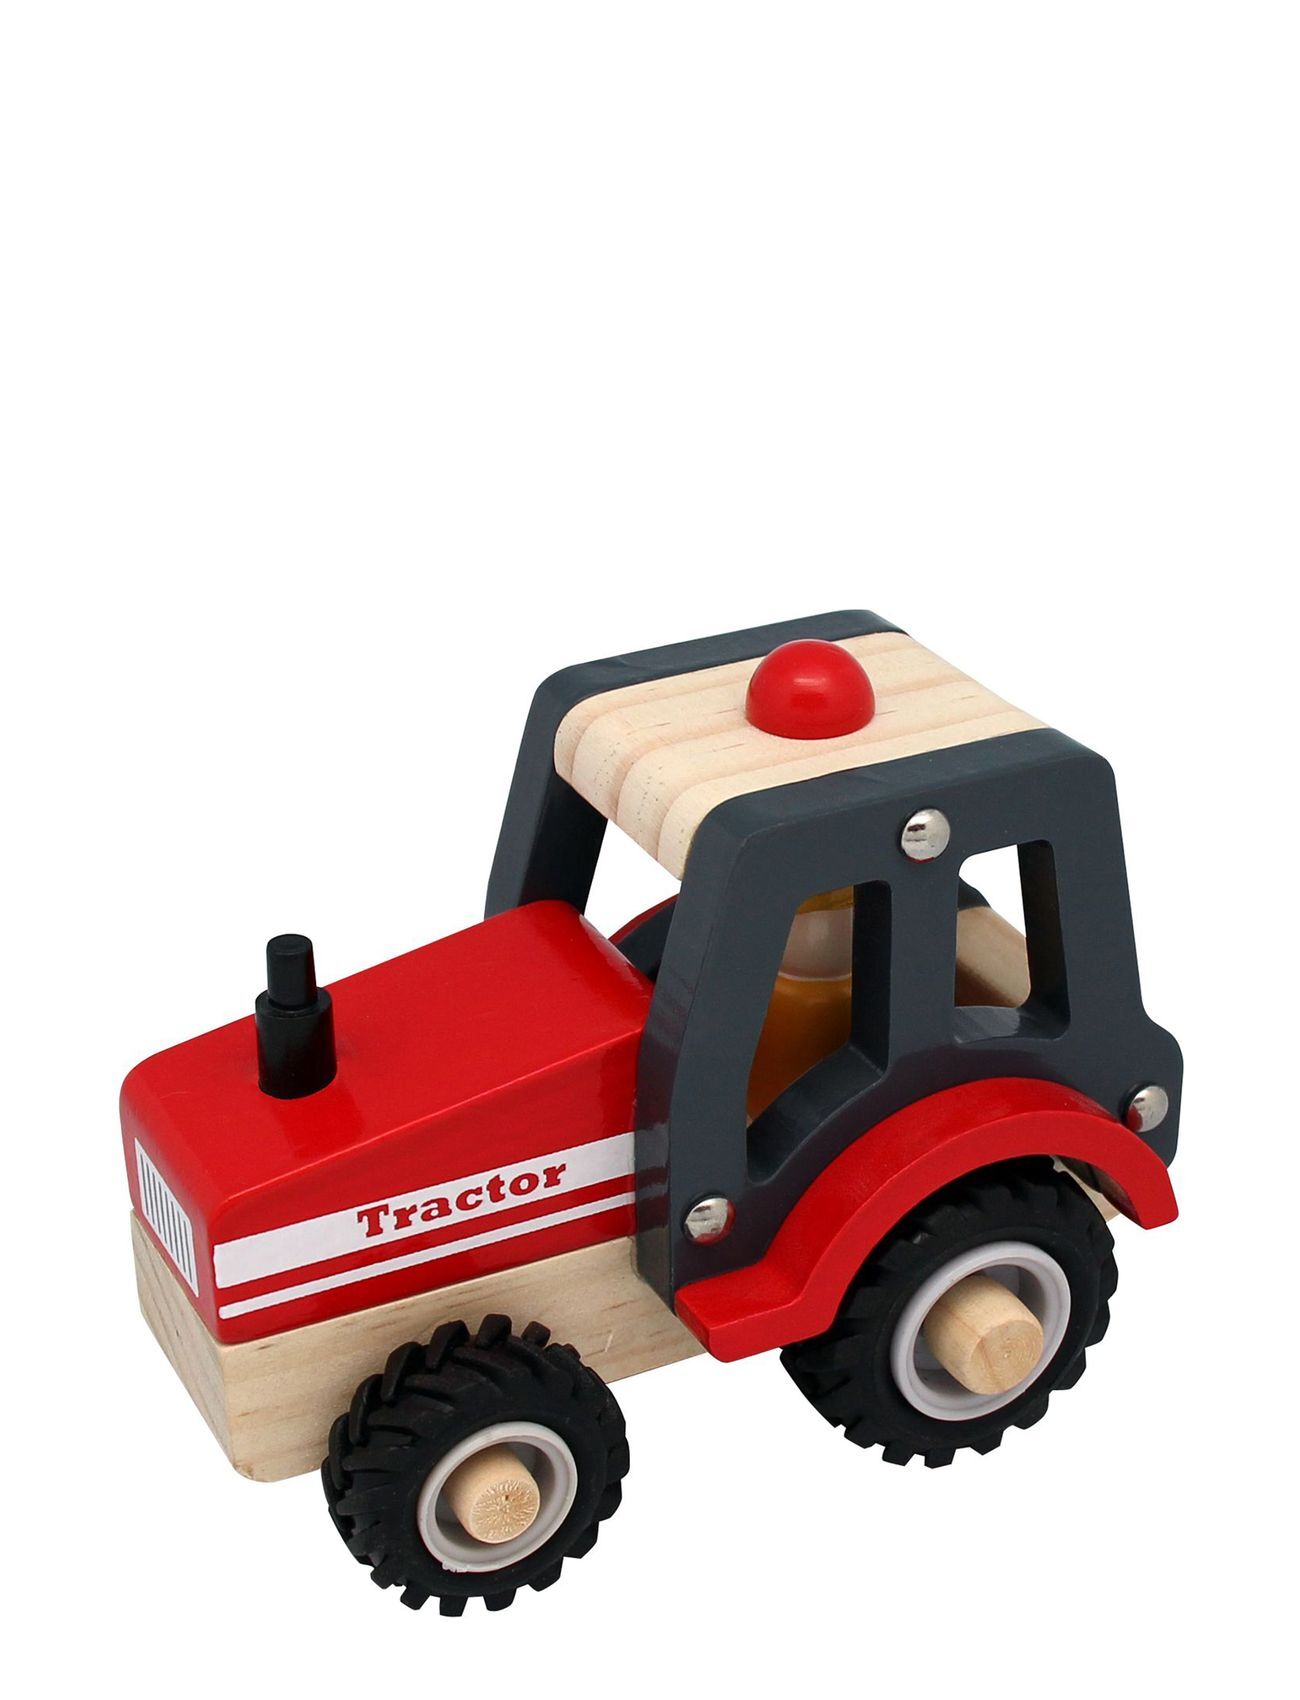 Magni Toys Wooden Tractor With Rubber Wheels Toys Toy Cars & Vehicles Toy Vehicles Rød Magni Toys